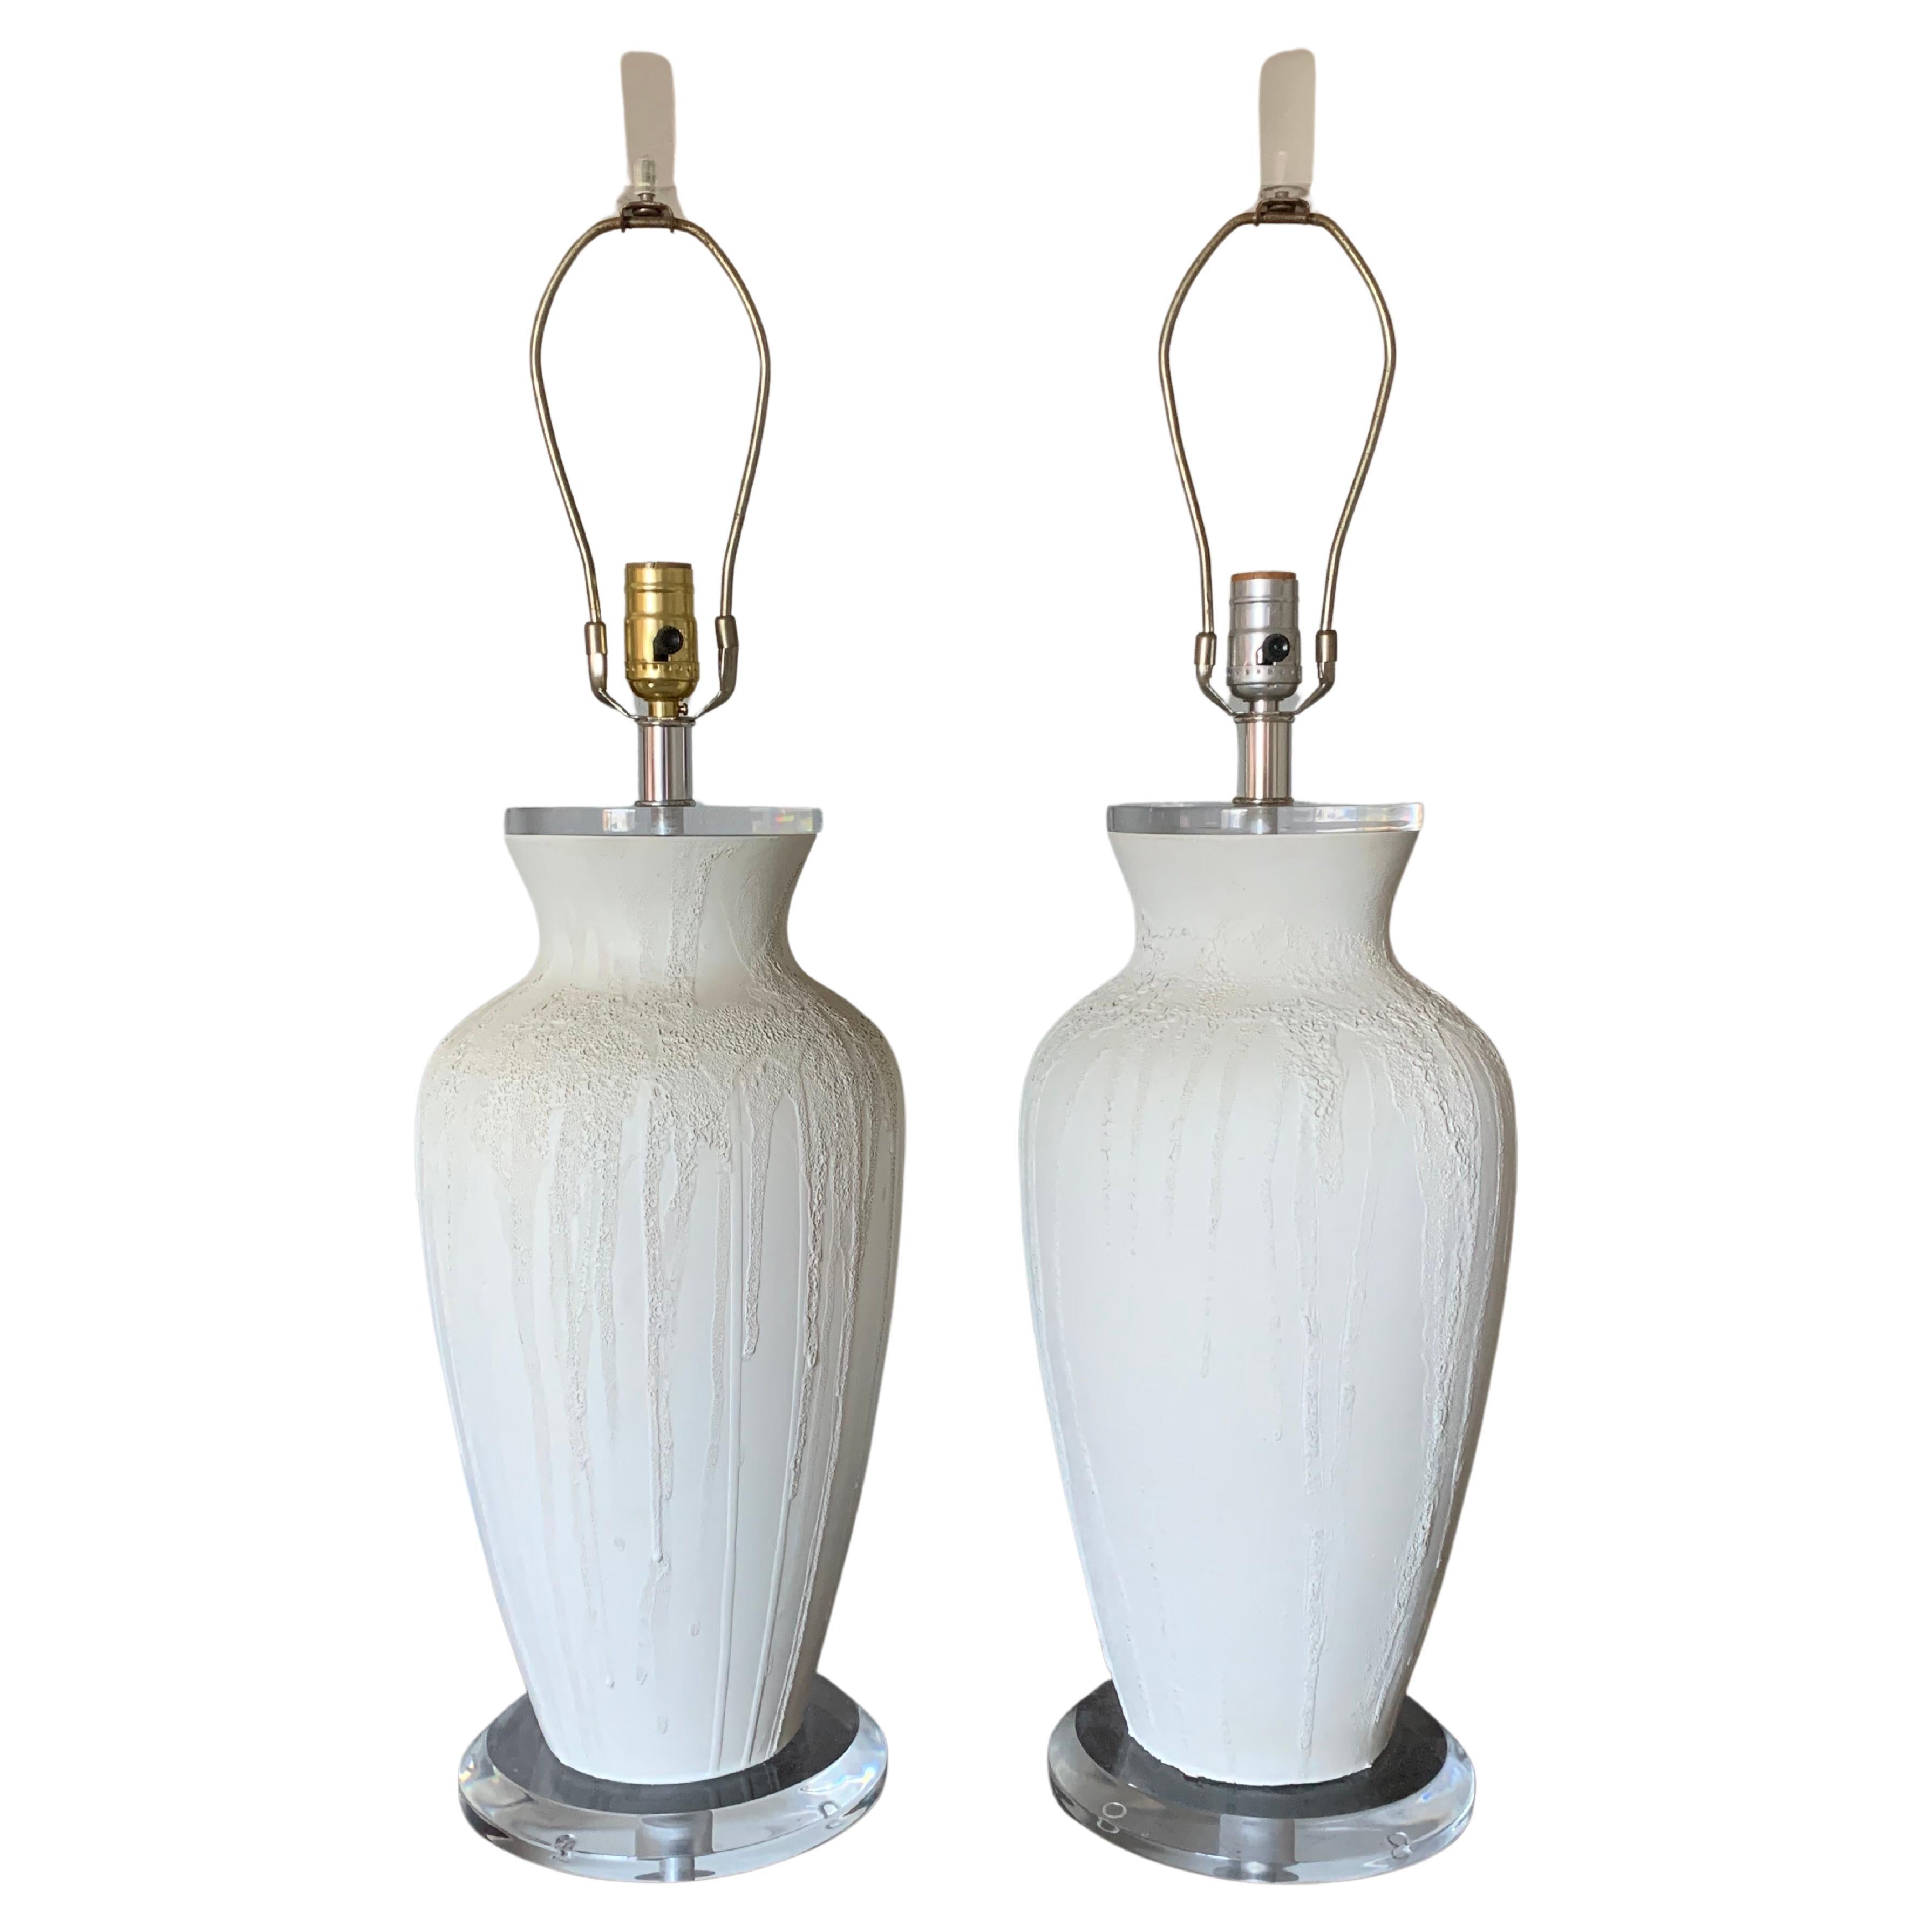 Pair of Mid Century Modern lamps, white ceramic with a dramatic texture falling from the top. Sitting upon lucite bases with a frosted lucite top to the lamp. Clean and fresh look sure to blend flawlessly into any mid century modern, postmodern, or